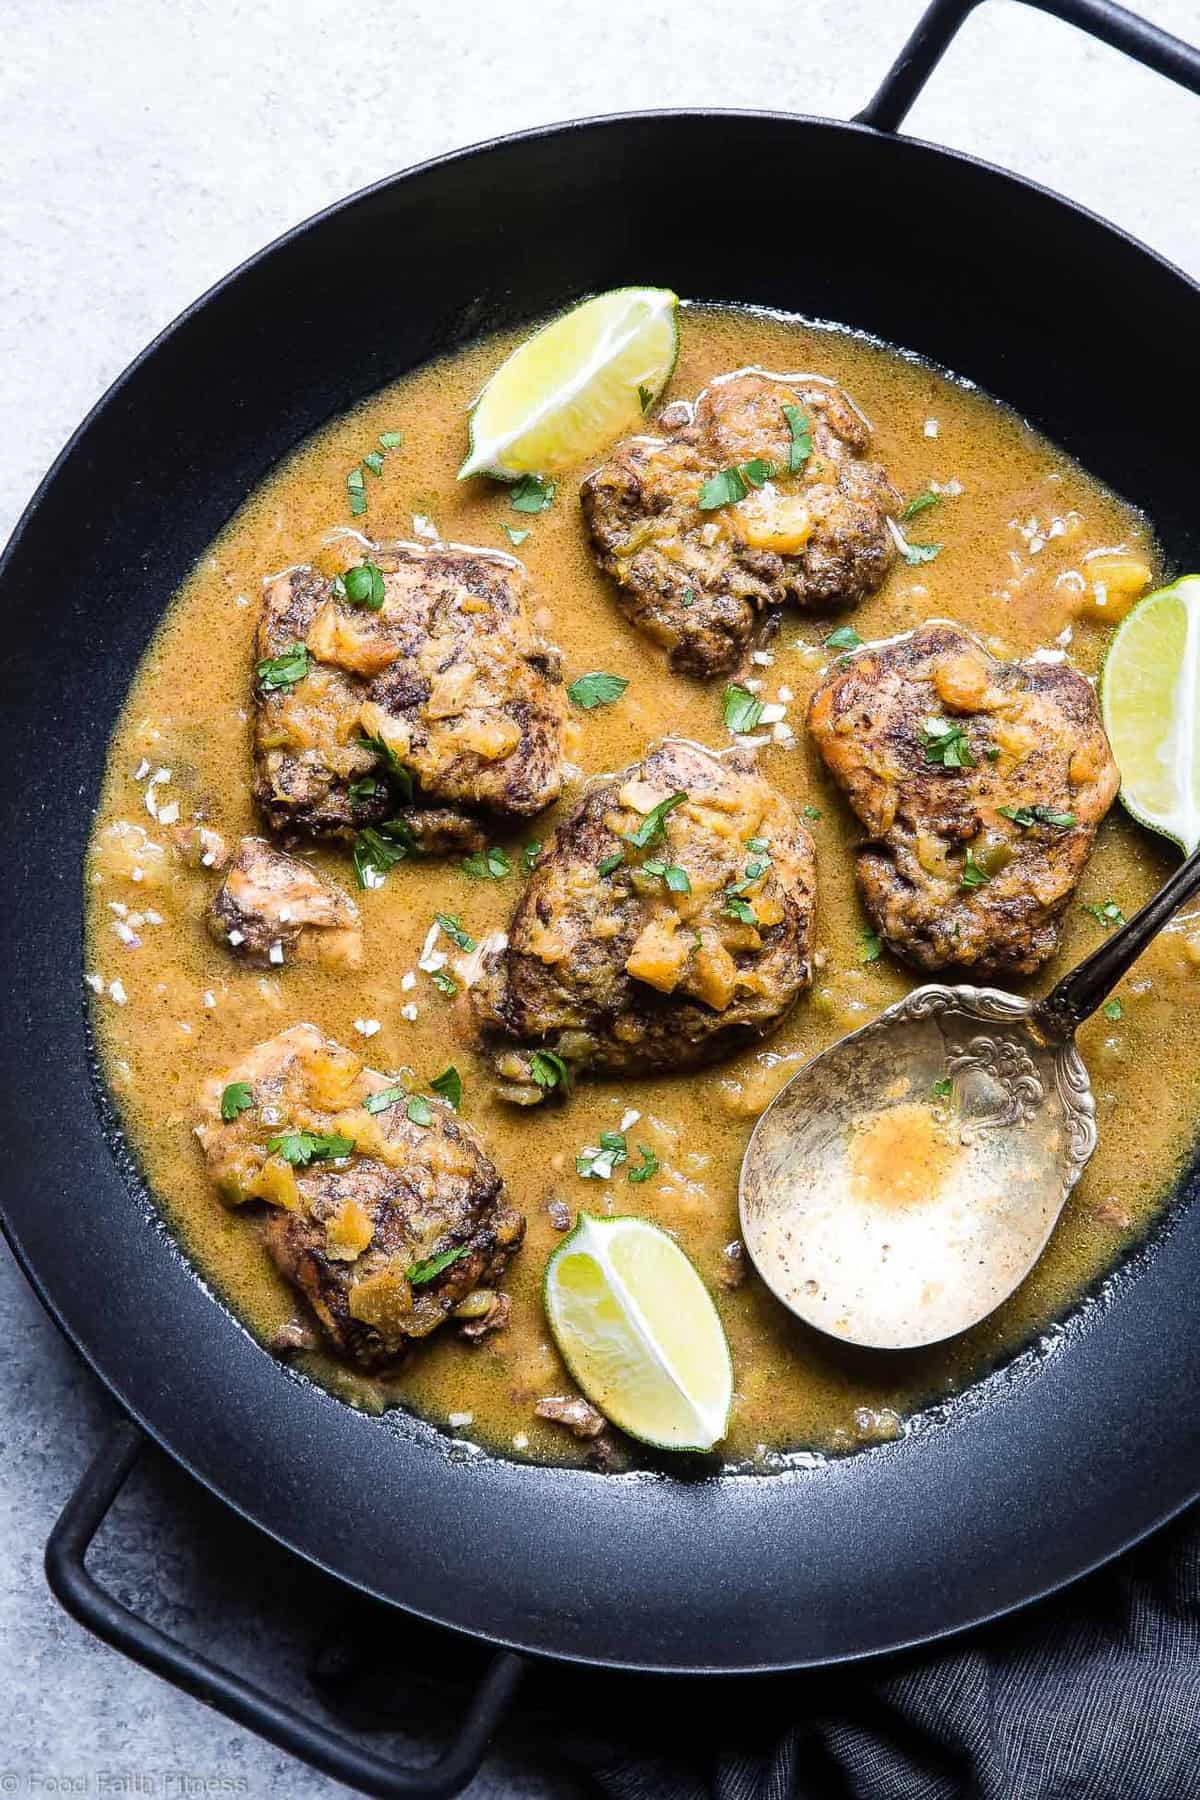 Whole30 Crock Pot Jerk Chicken Curry - This crock pot jerk chicken curry is a CRAZY easy, weeknight dinner that is BIG on Island flavor! It's gluten free and paleo/whole30 compliant but it does not taste healthy AT all! Makes the BEST leftovers! | #Foodfaithfitness | #Glutenfree #Paleo #Whole30 #Dairyfree #Slowcooker